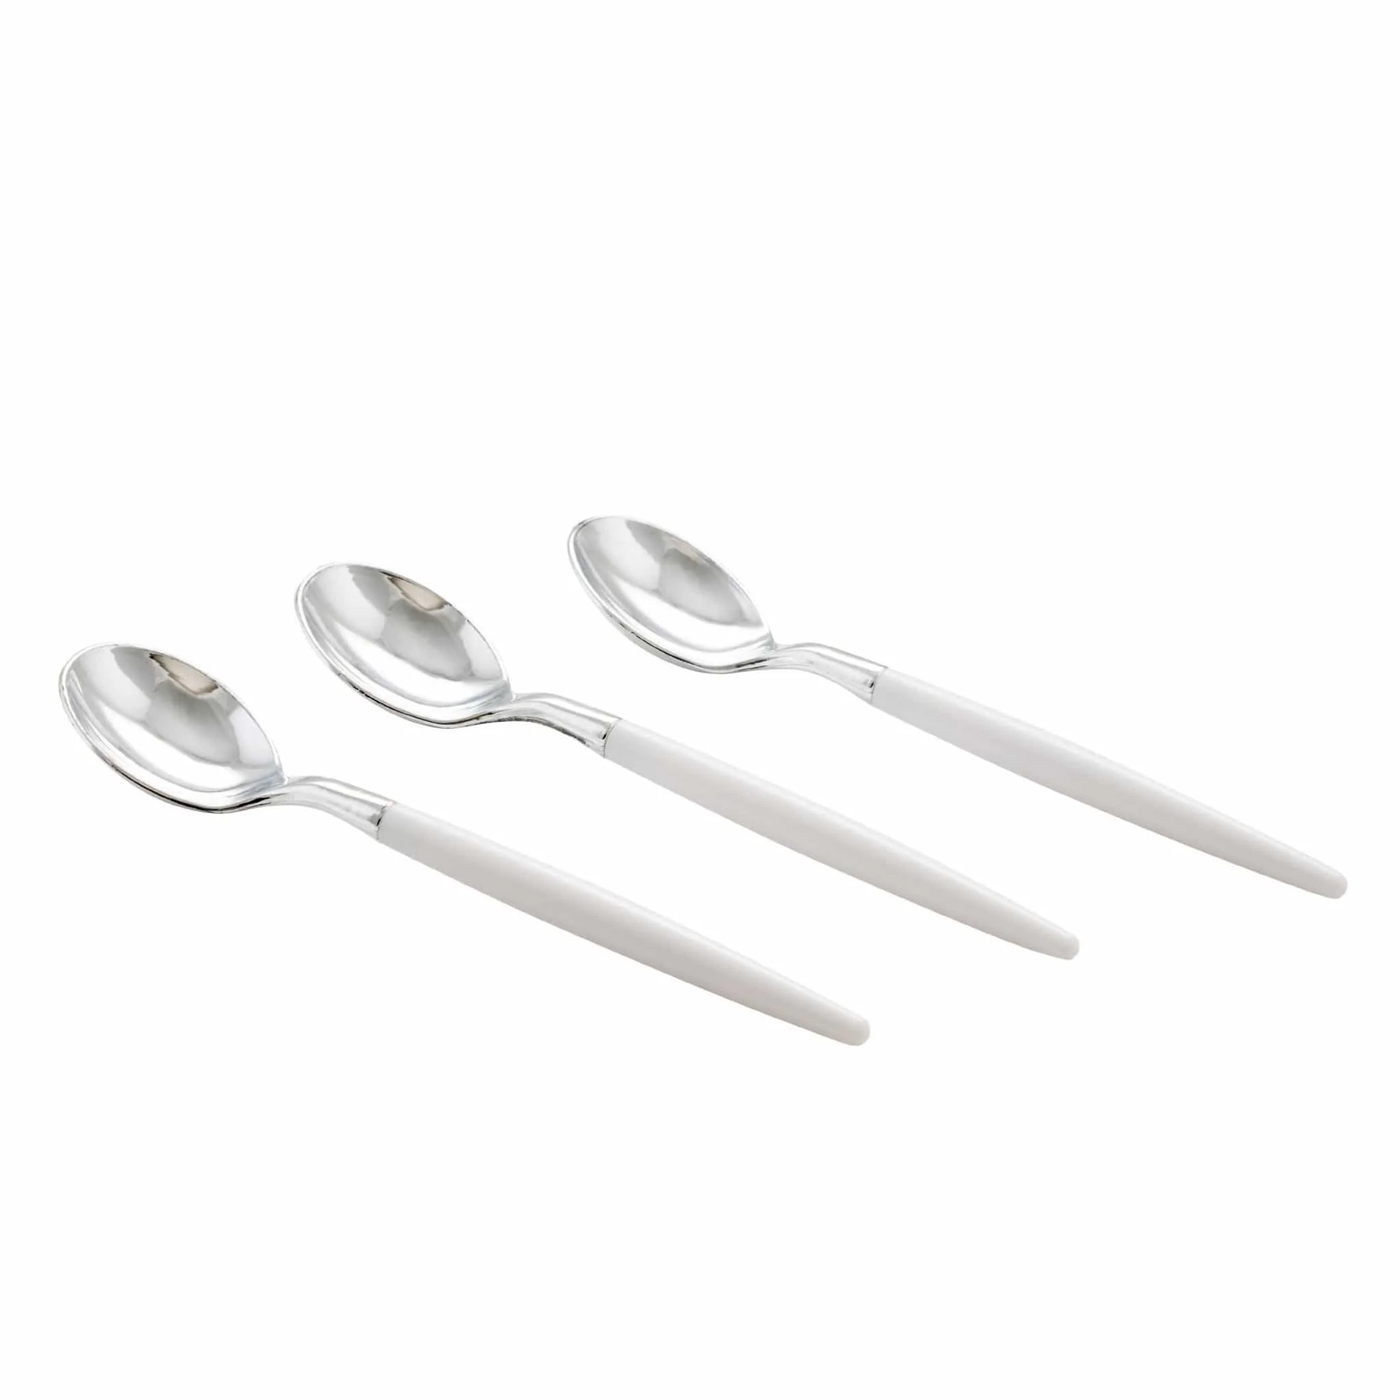 White and Silver Plastic Mini Spoons | 20 Spoons - Set With Style